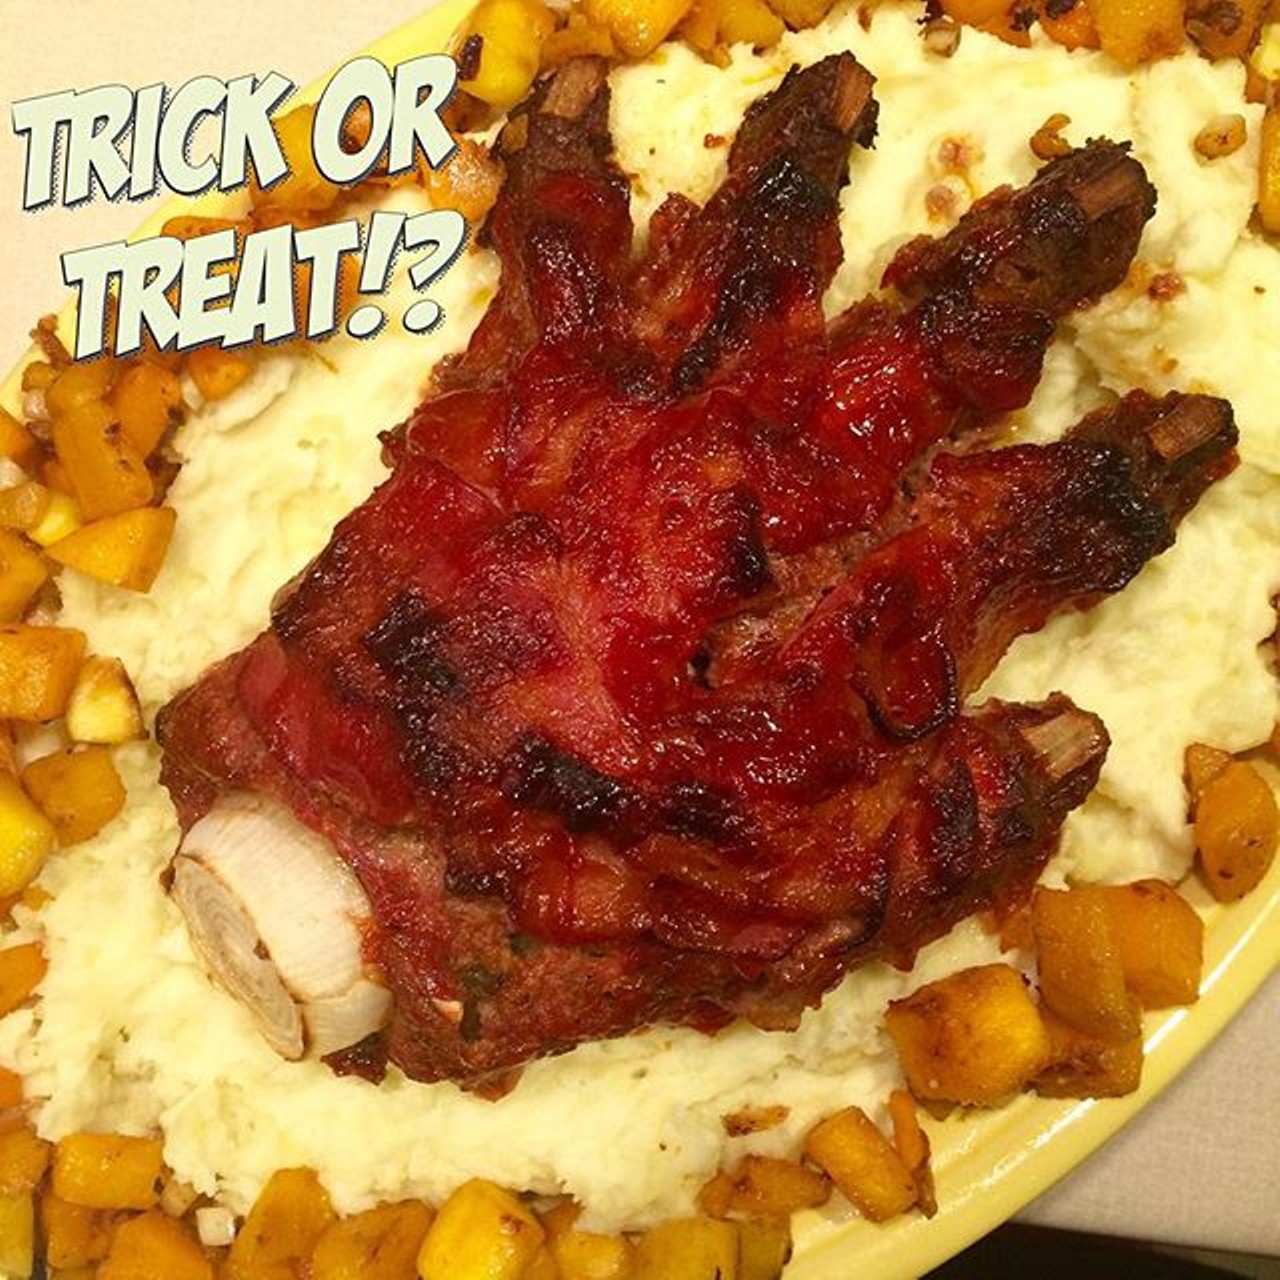 Muhahahahhaha HAPPY HALLOWEEN One of my favorite Halloween tricks is actually just a bacon wrapped meatloaf molded into a hand which is quite the treat!